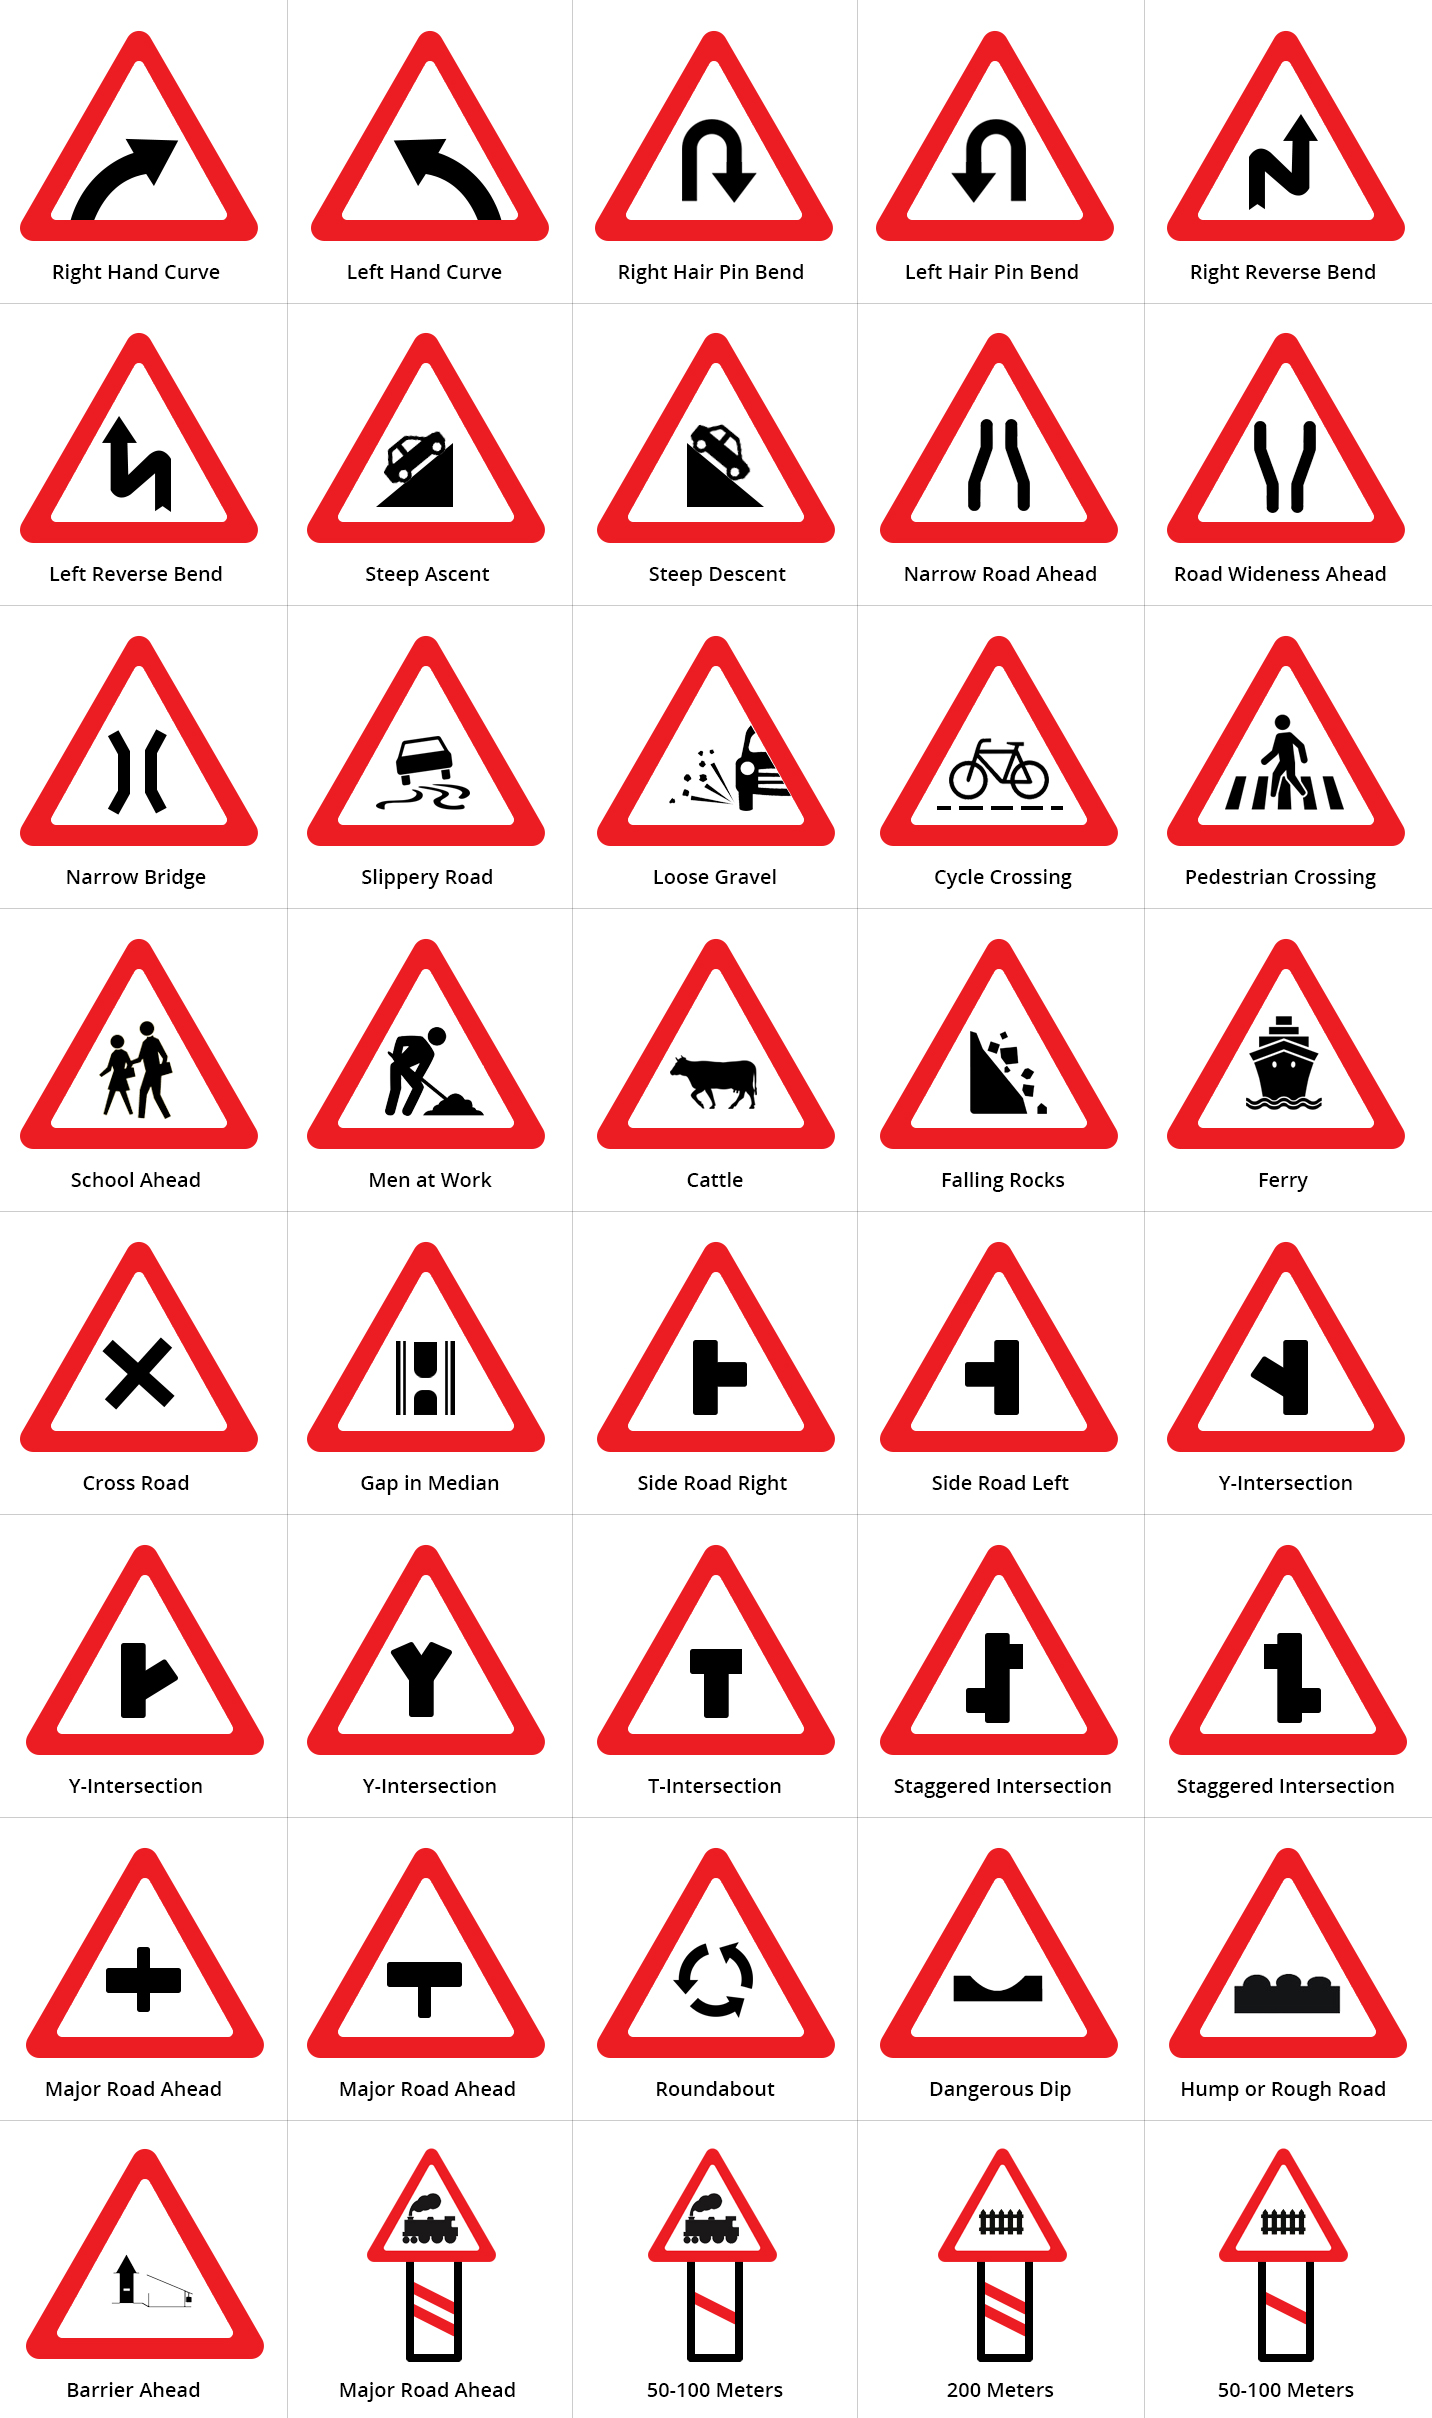 Cautionary or Warning or Precautionary Signs